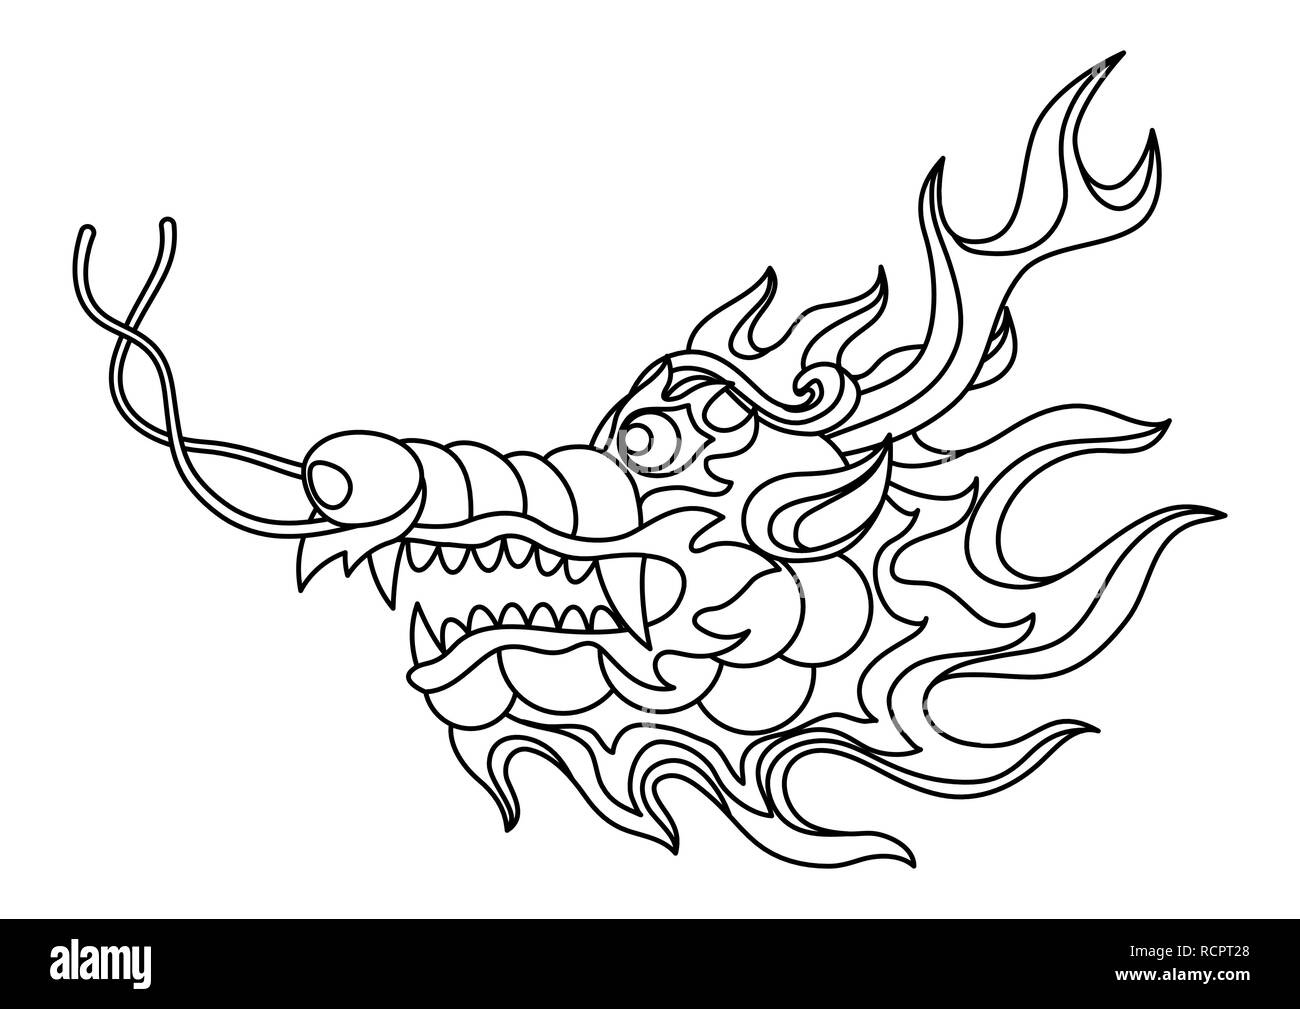 Chinese Dragon Head Black And White Stock Photos & Images - Alamy